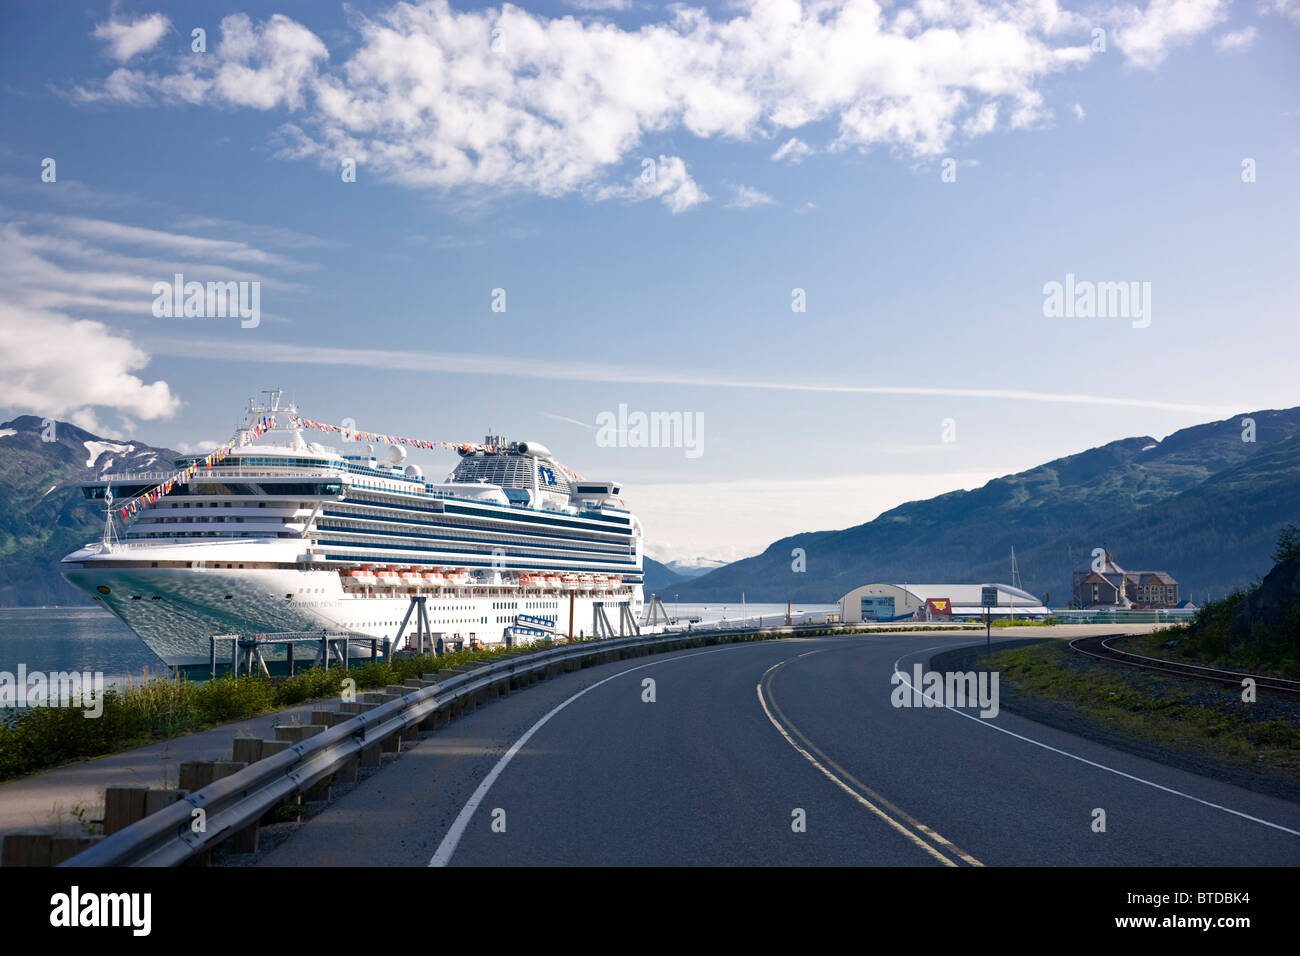 View of the road to the Whittier Harbor and the *Diamond* Princess cruise ship docked during Summer, Southcentral Alaska Stock Photo